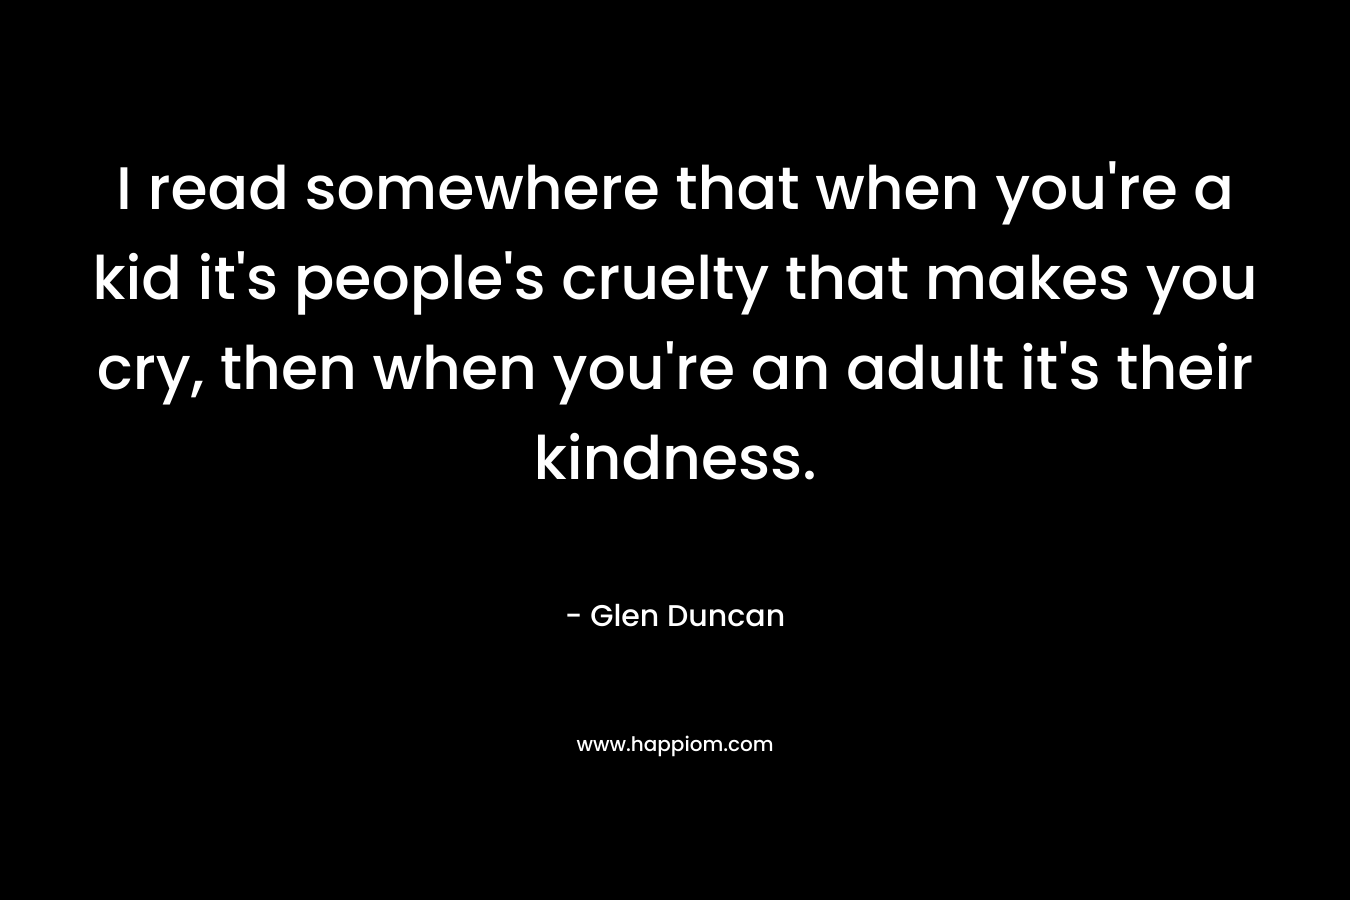 I read somewhere that when you're a kid it's people's cruelty that makes you cry, then when you're an adult it's their kindness.